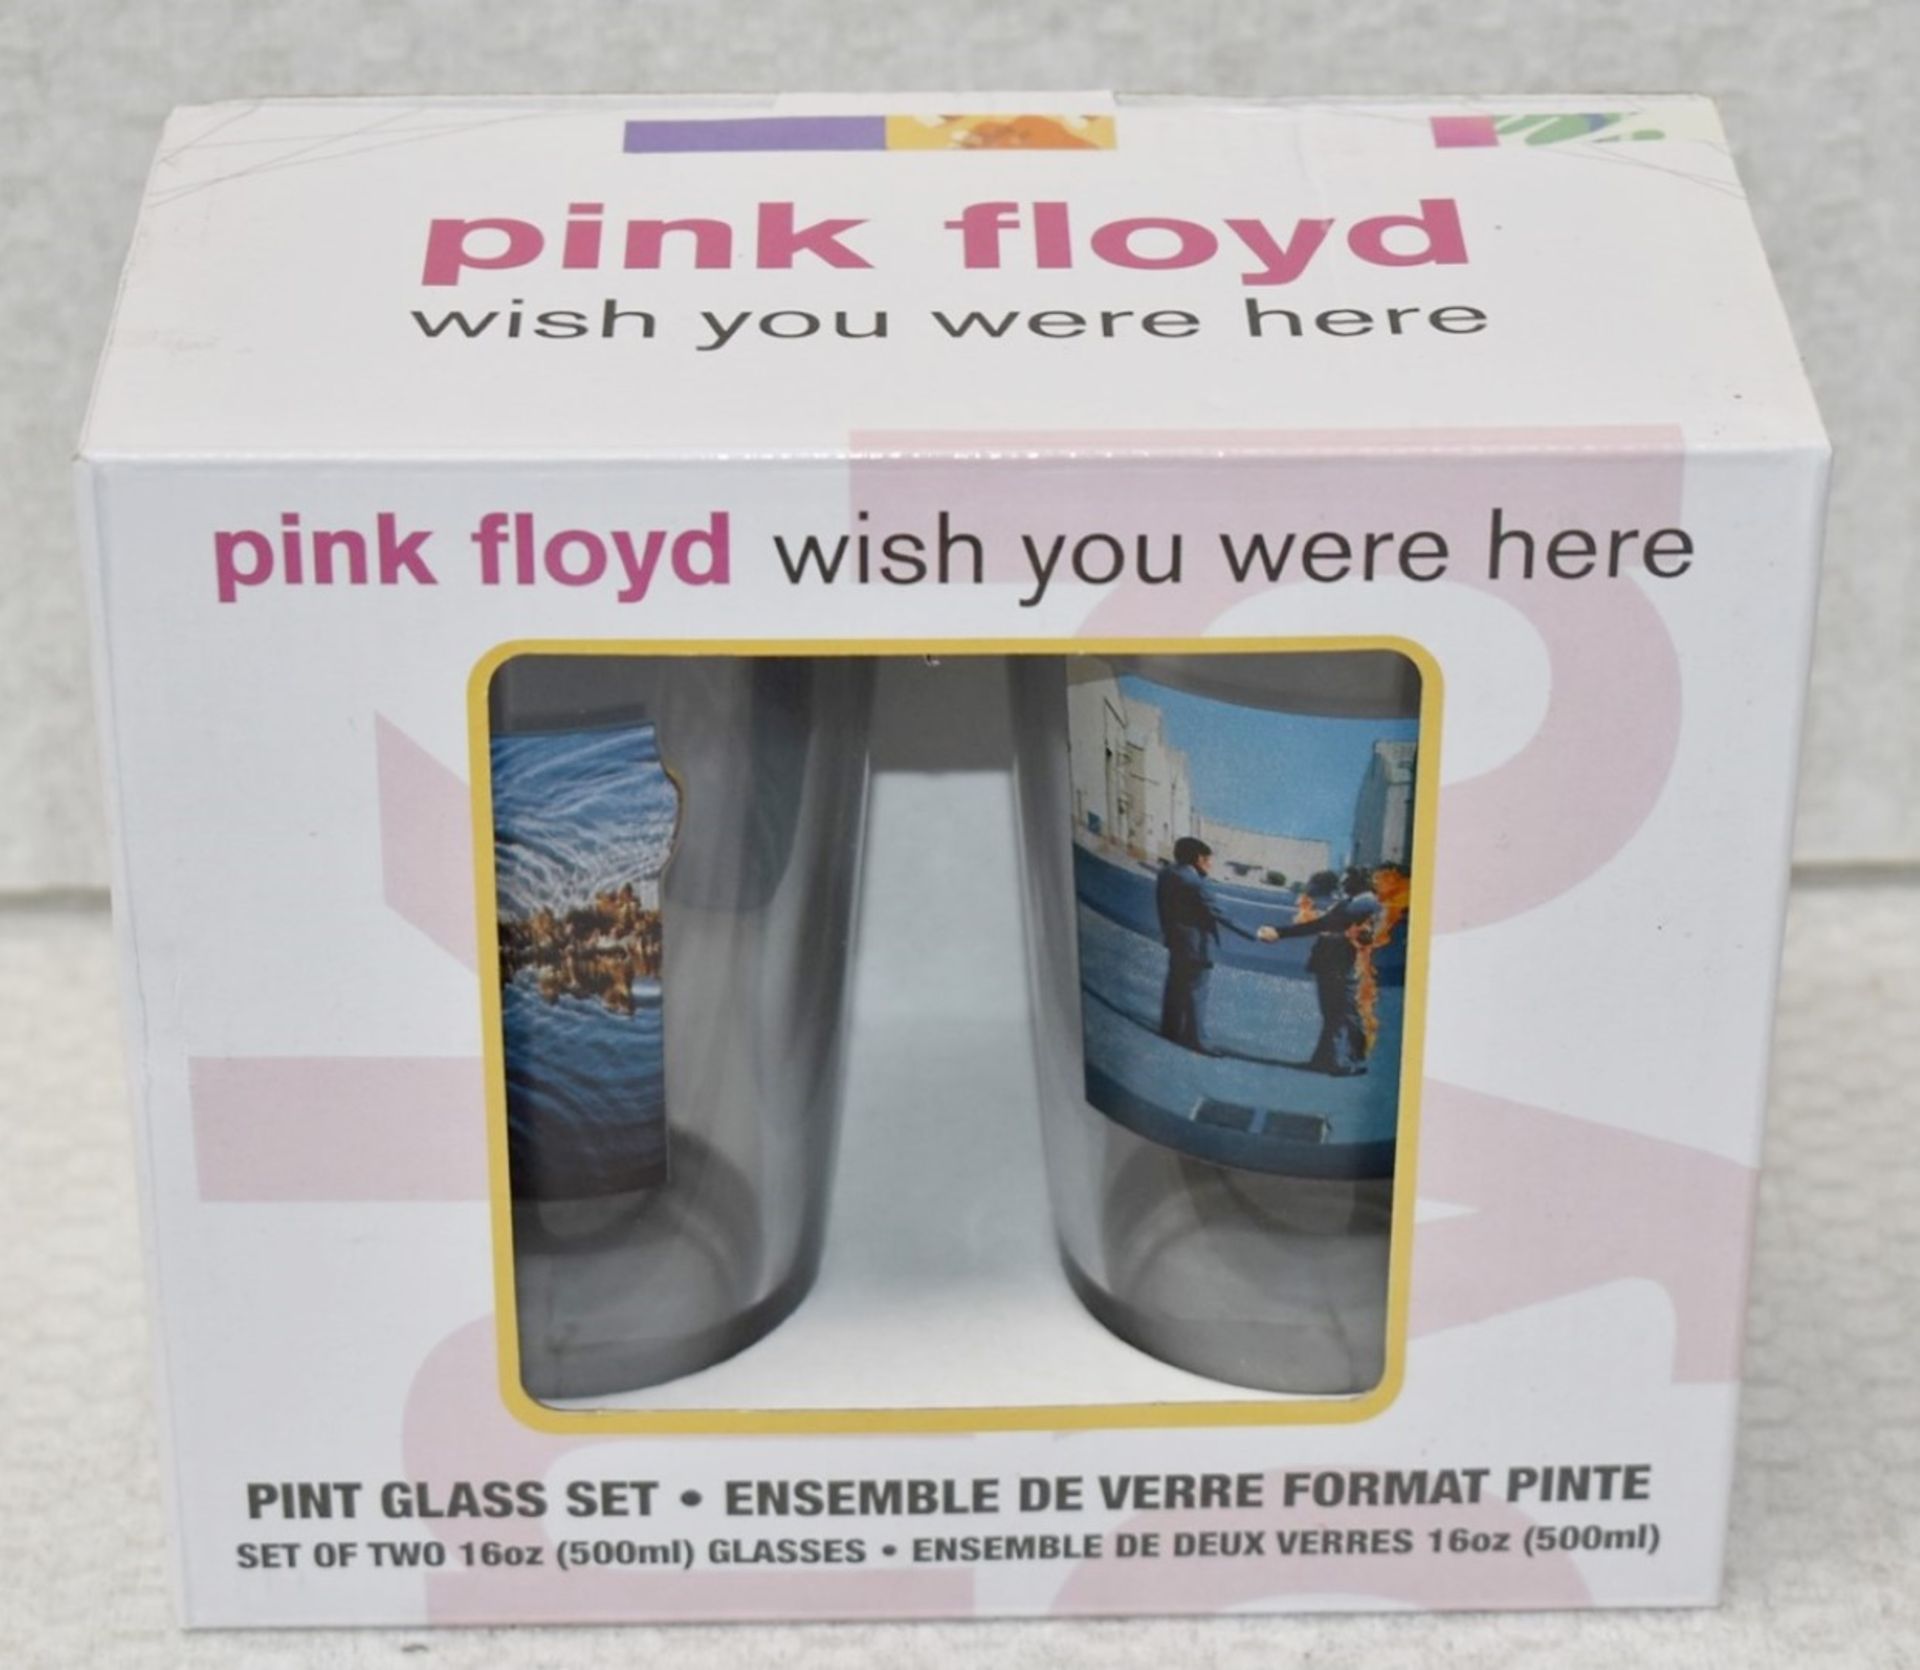 5 x Sets of Pink Floyd 'Wish You Were Here' Drinking Glass Gift Packs - Each Pack Contains 2 x 16oz - Image 2 of 4